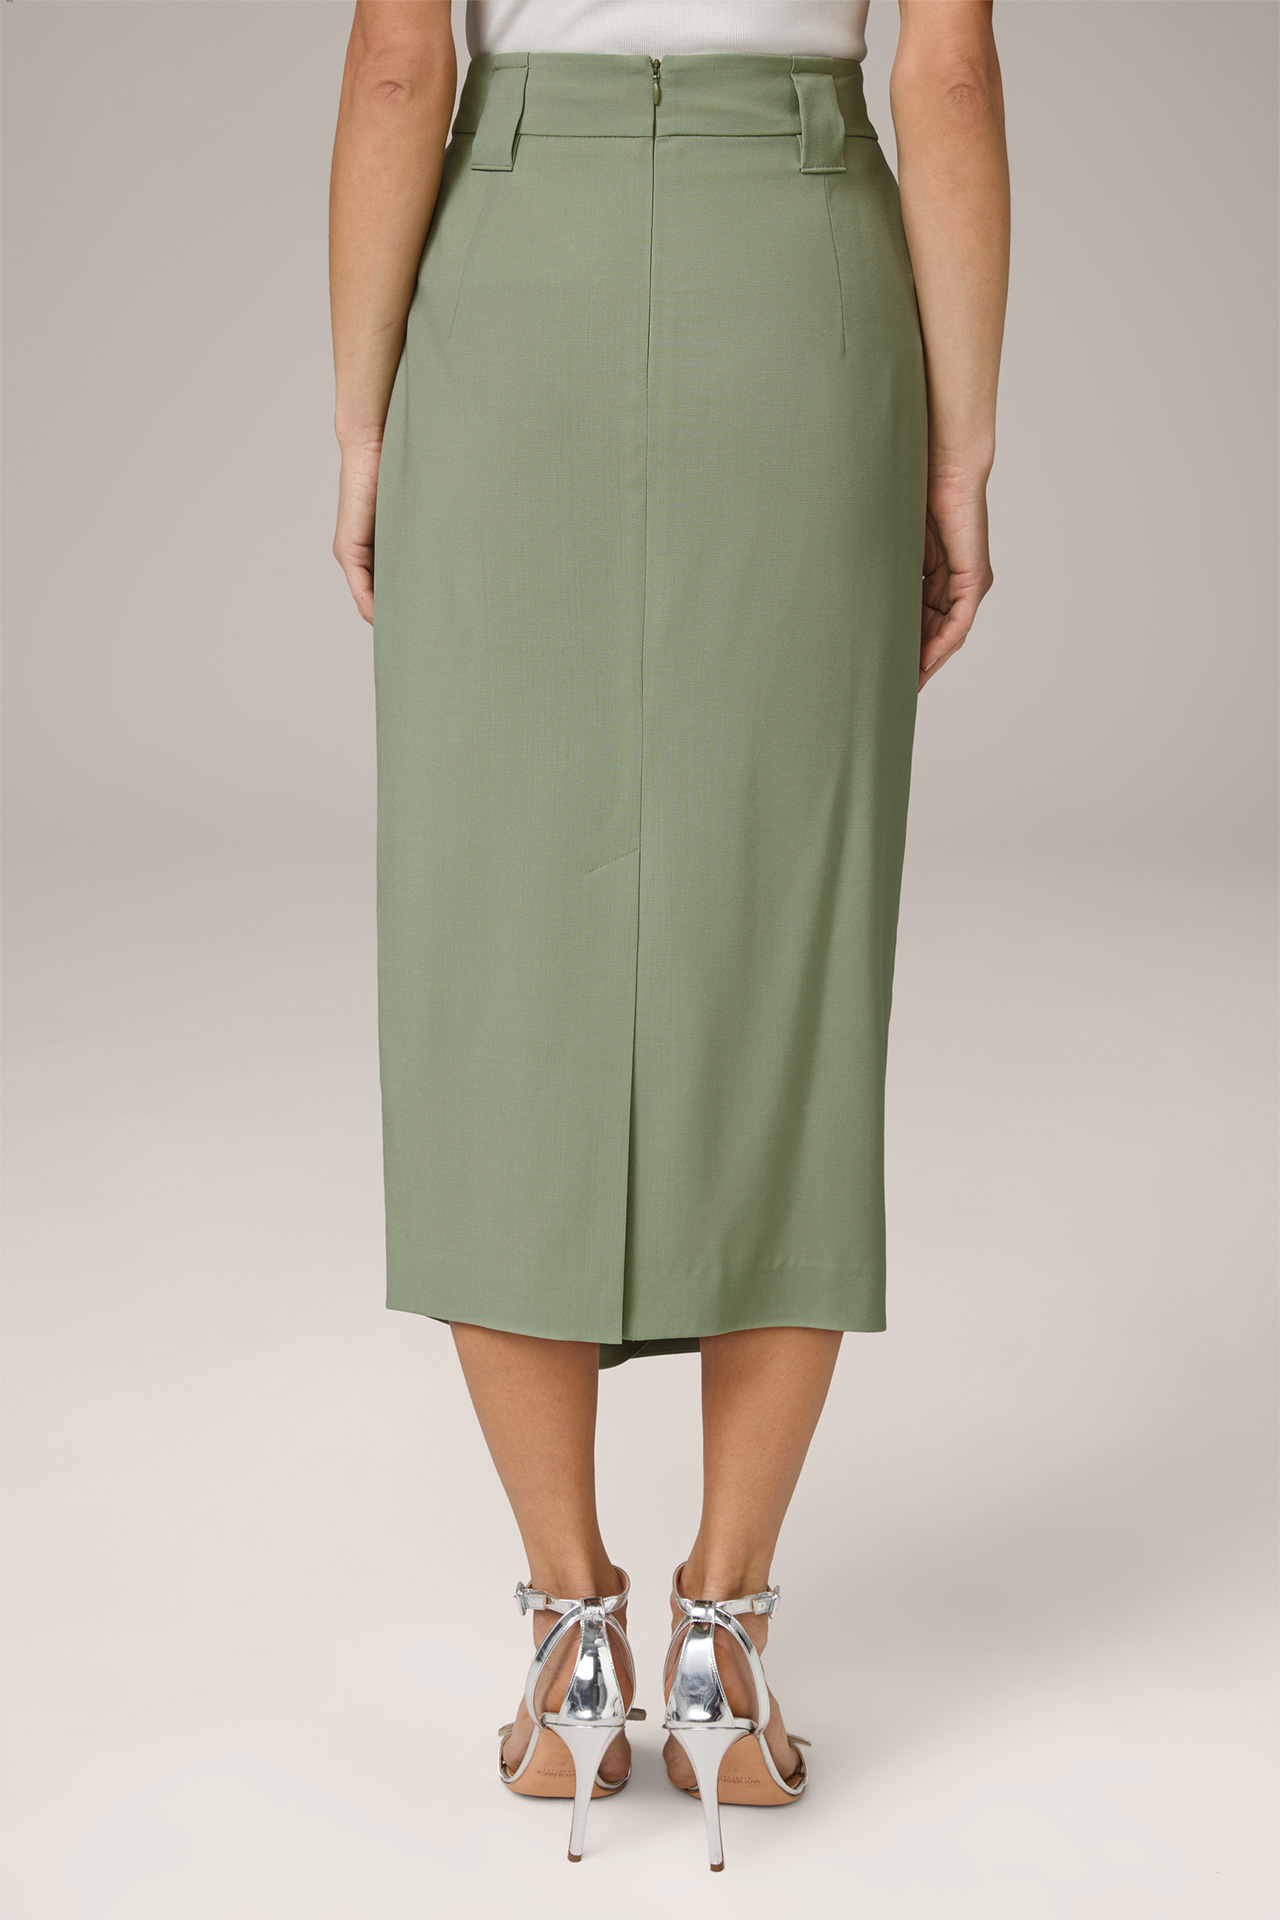 Virgin Wool Midi Length Skirt with Wrapover in Sage